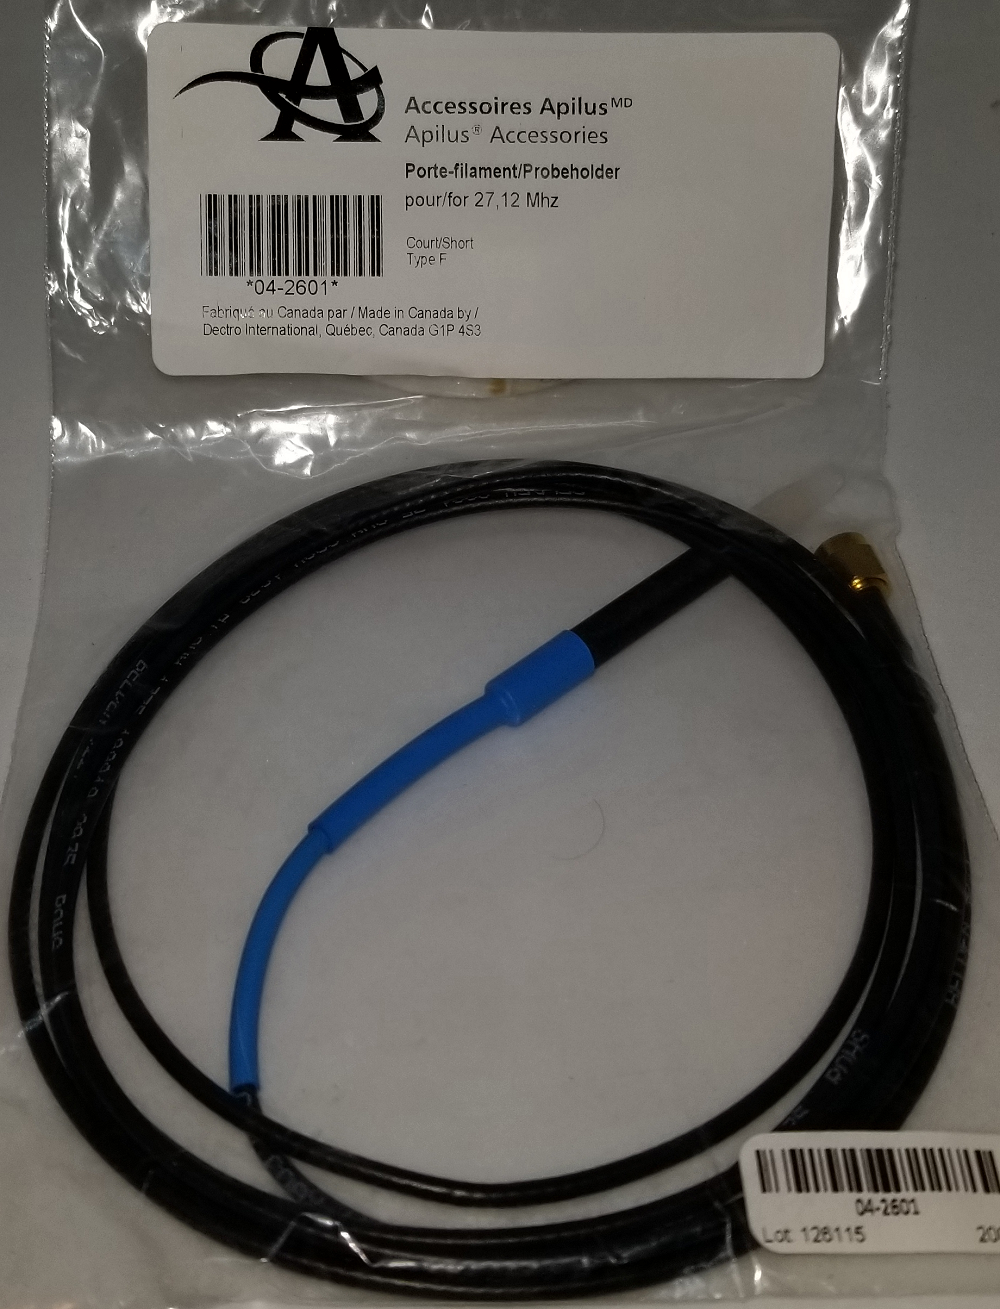 Canadian OEM Made Needle Cords for Apilus- Short